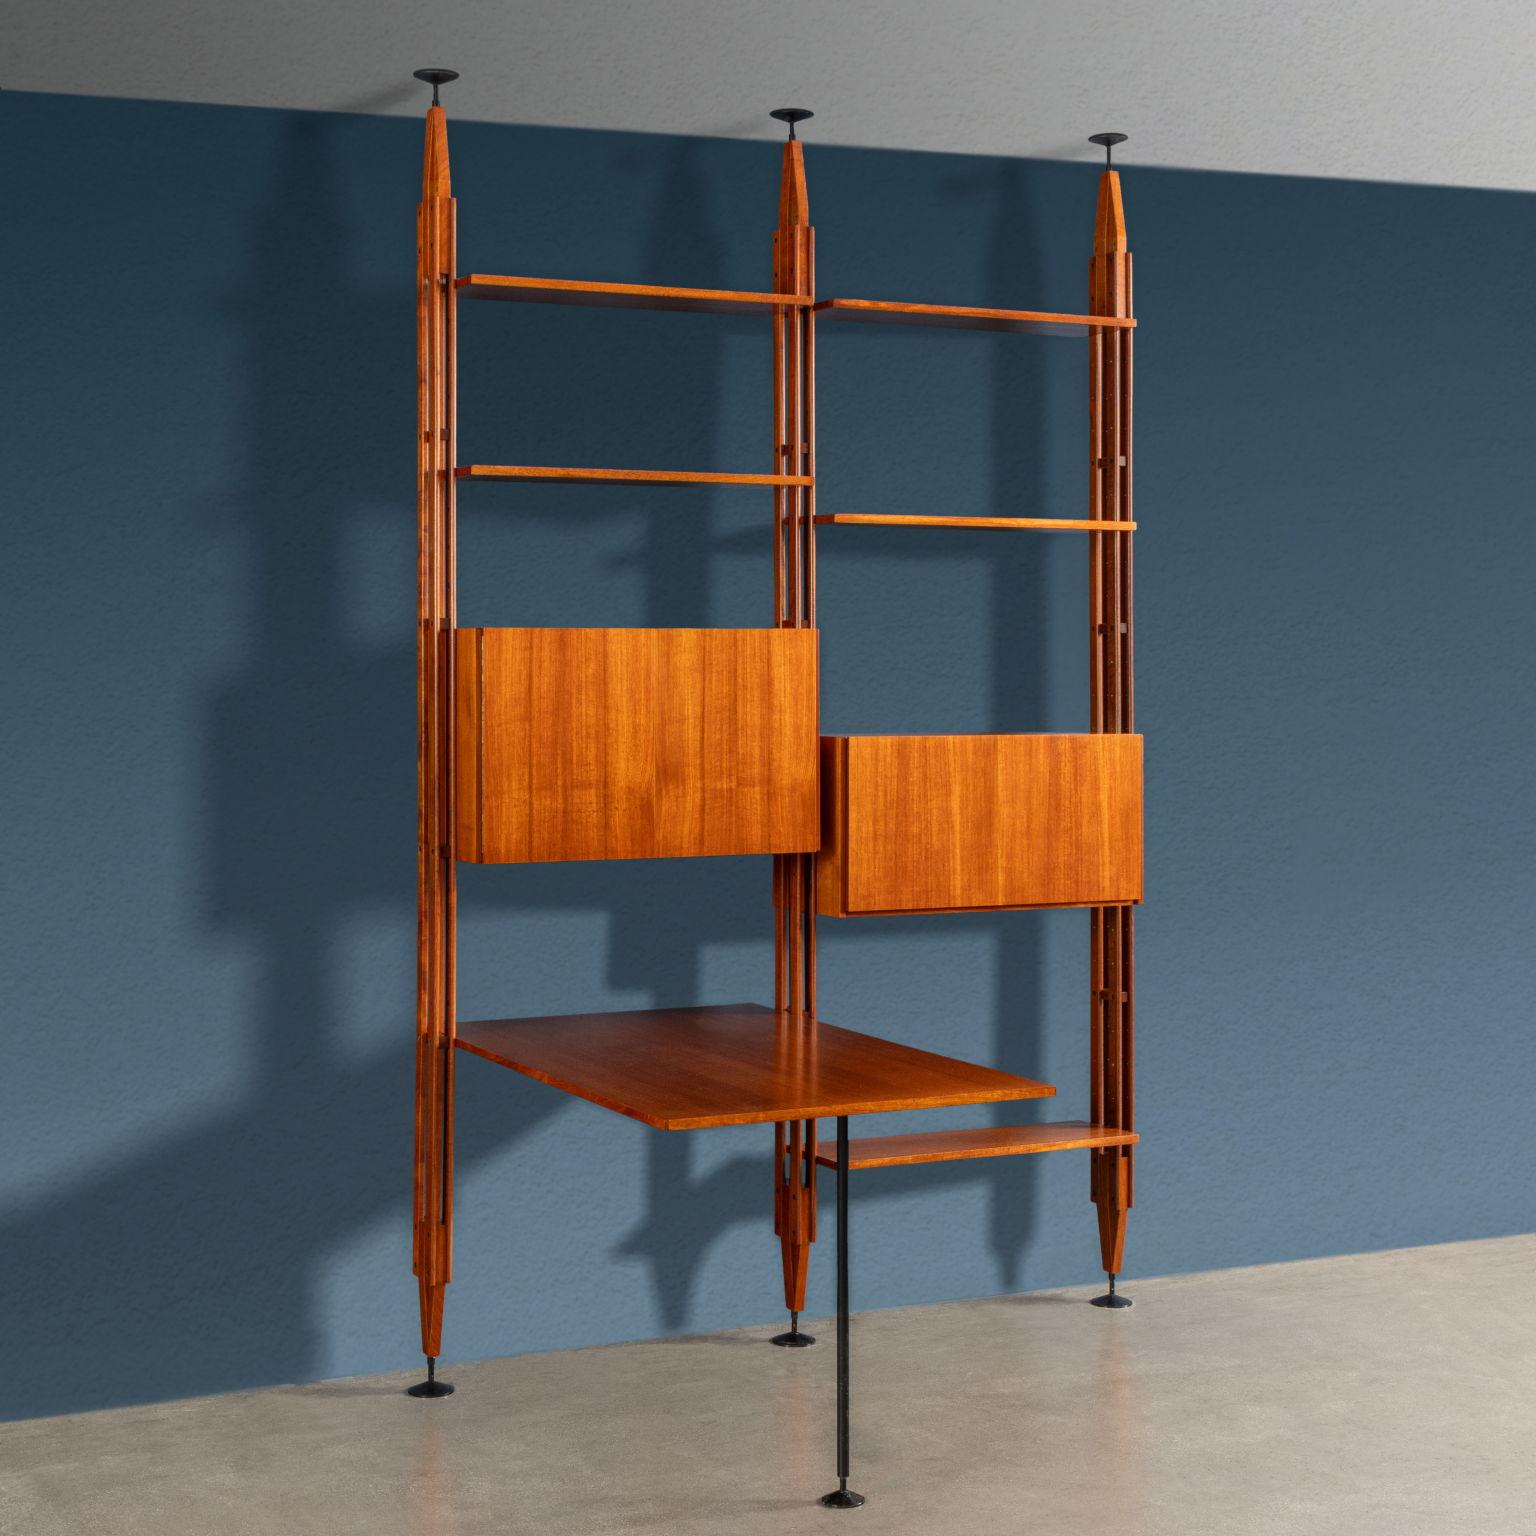 Iconic two-bay ceiling bookcase with top model 'LB7', designed by Franco Albini and produced by Poggi from the late 1950s. The bookcase features two bays with solid teak wood uprights pressure-fixed between ceiling and floor, height-adjustable